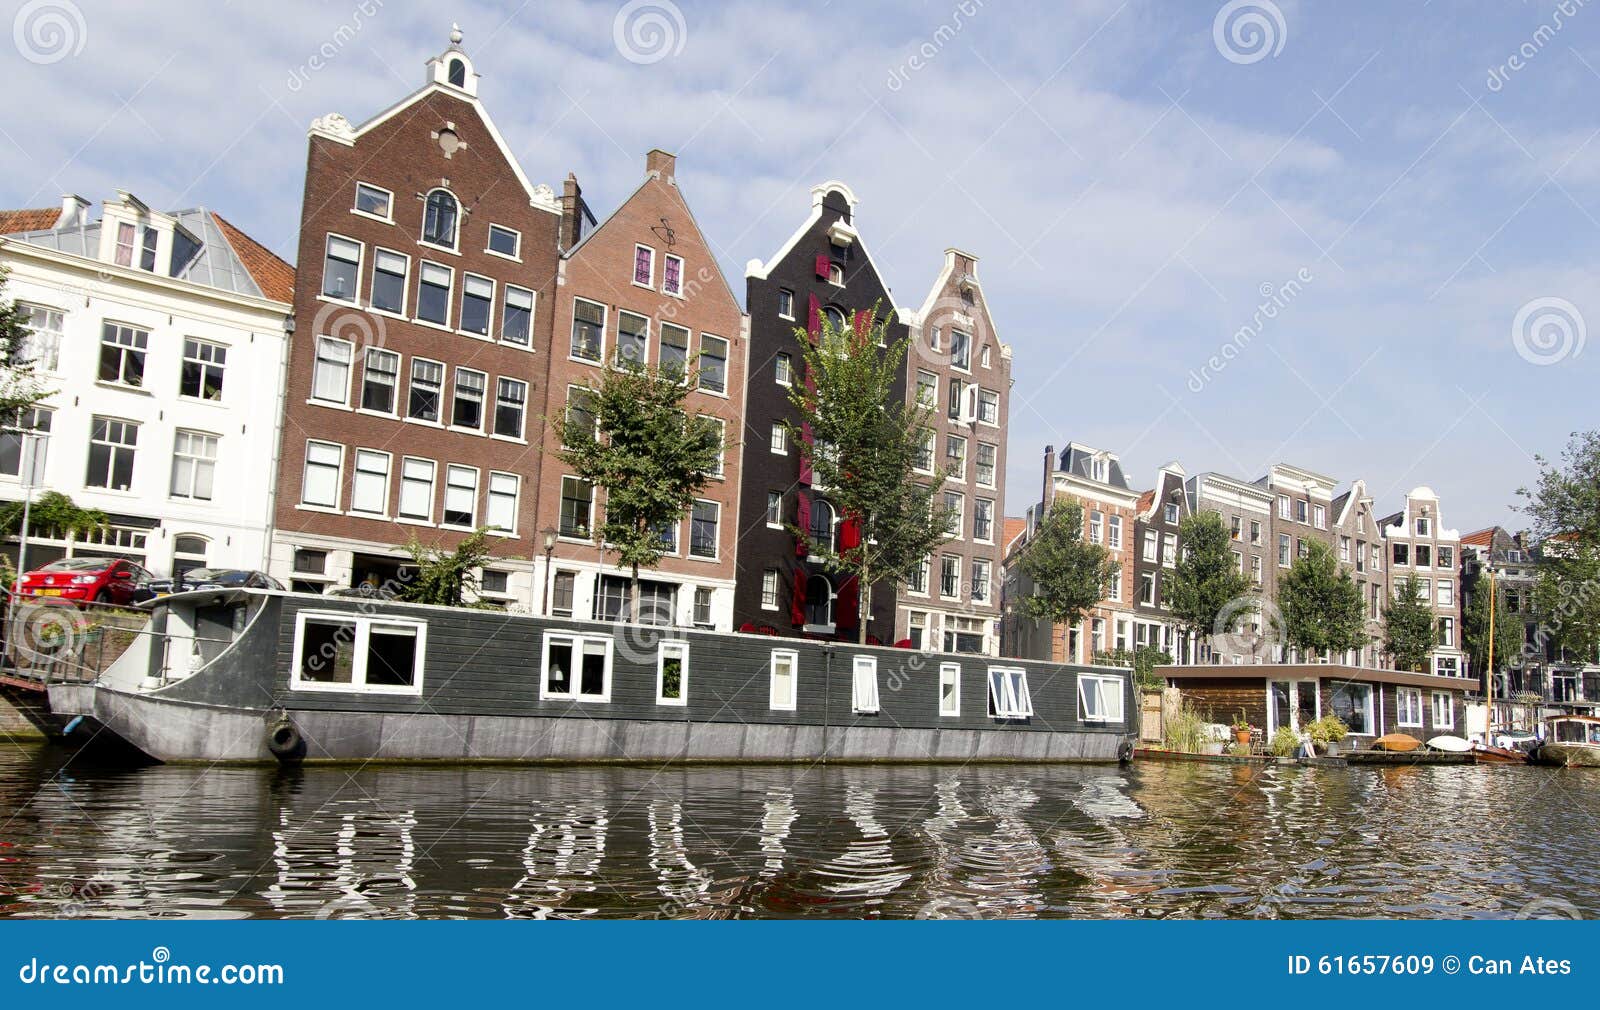 Netherlands Homes : Beautiful And Luxurious Terraced Houses At The